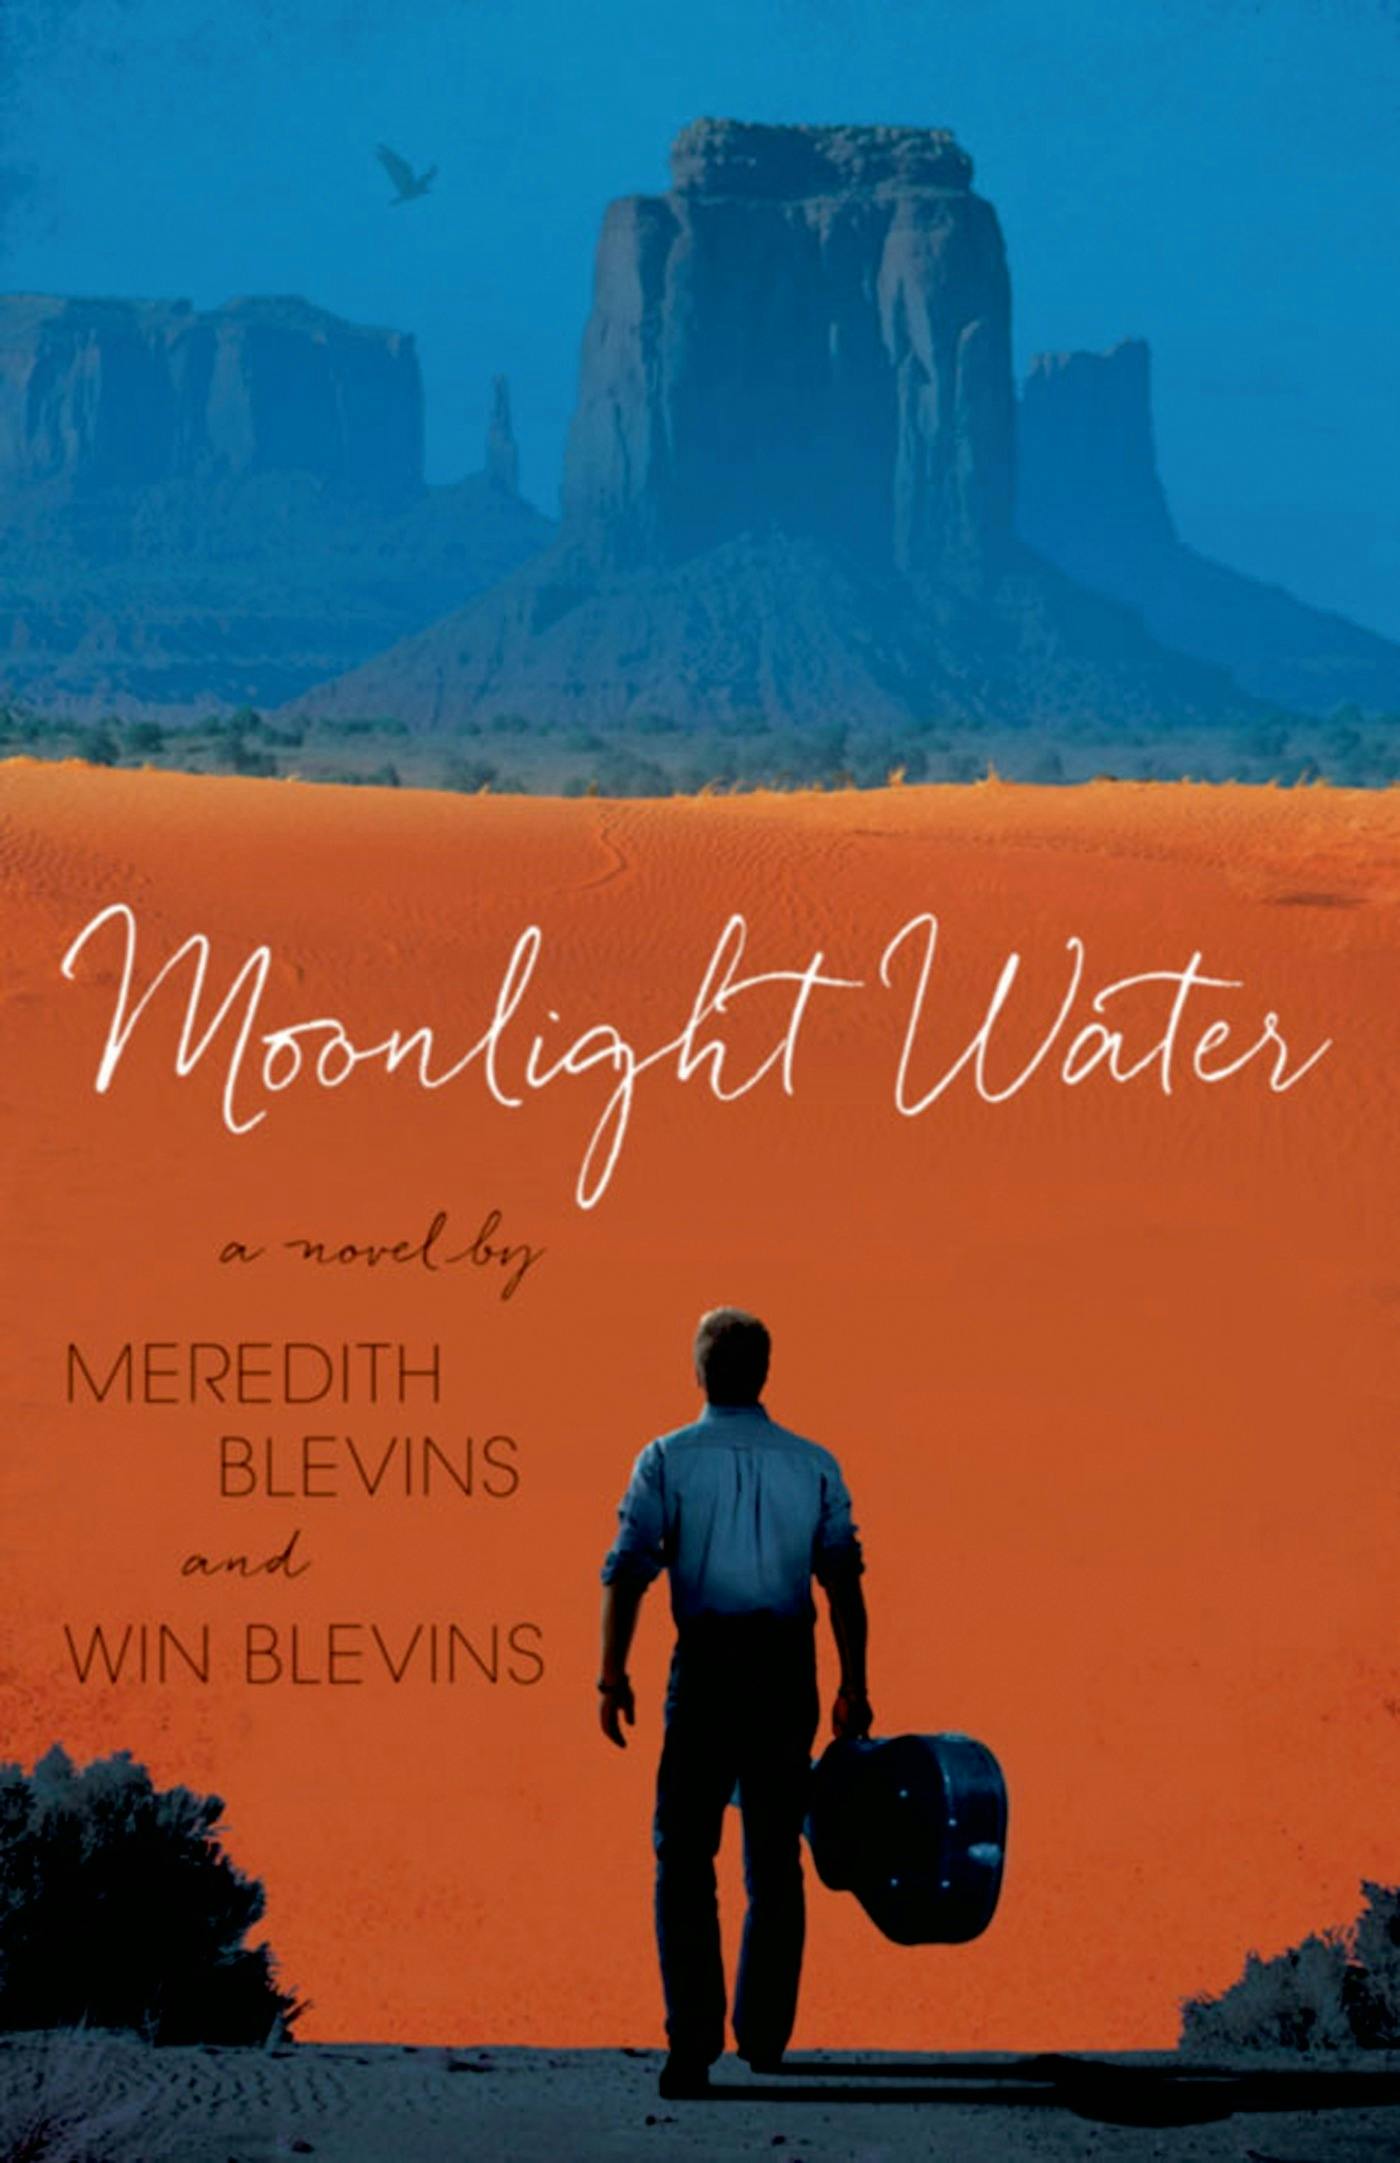 Cover for the book titled as: Moonlight Water